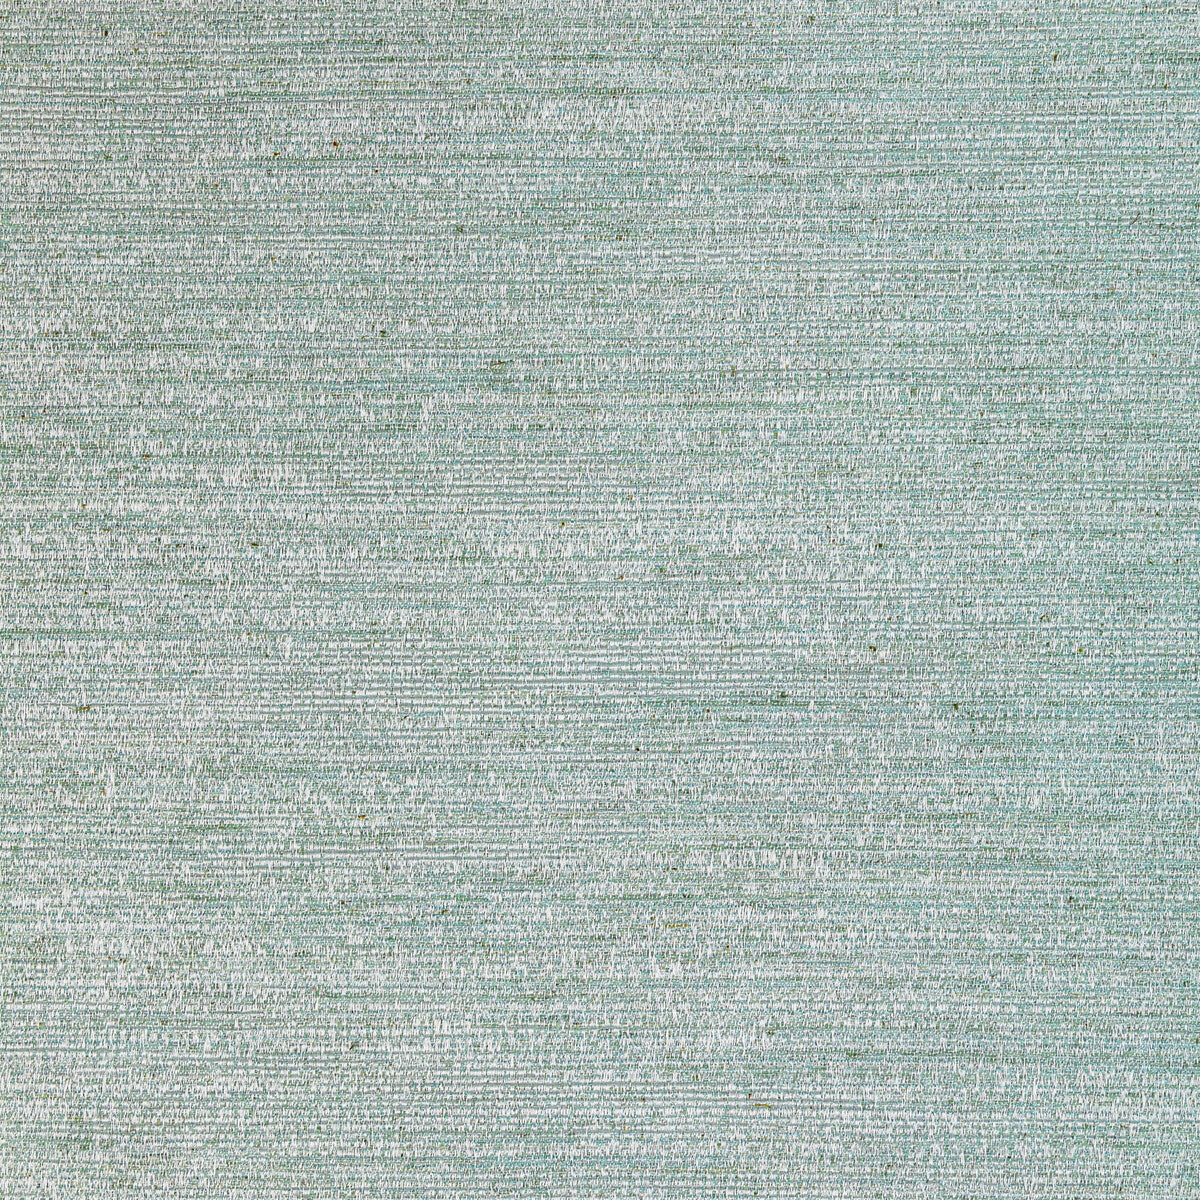 Cultivate fabric in soft aqua color - pattern 4957.13.0 - by Kravet Couture in the Modern Luxe Silk Luster collection